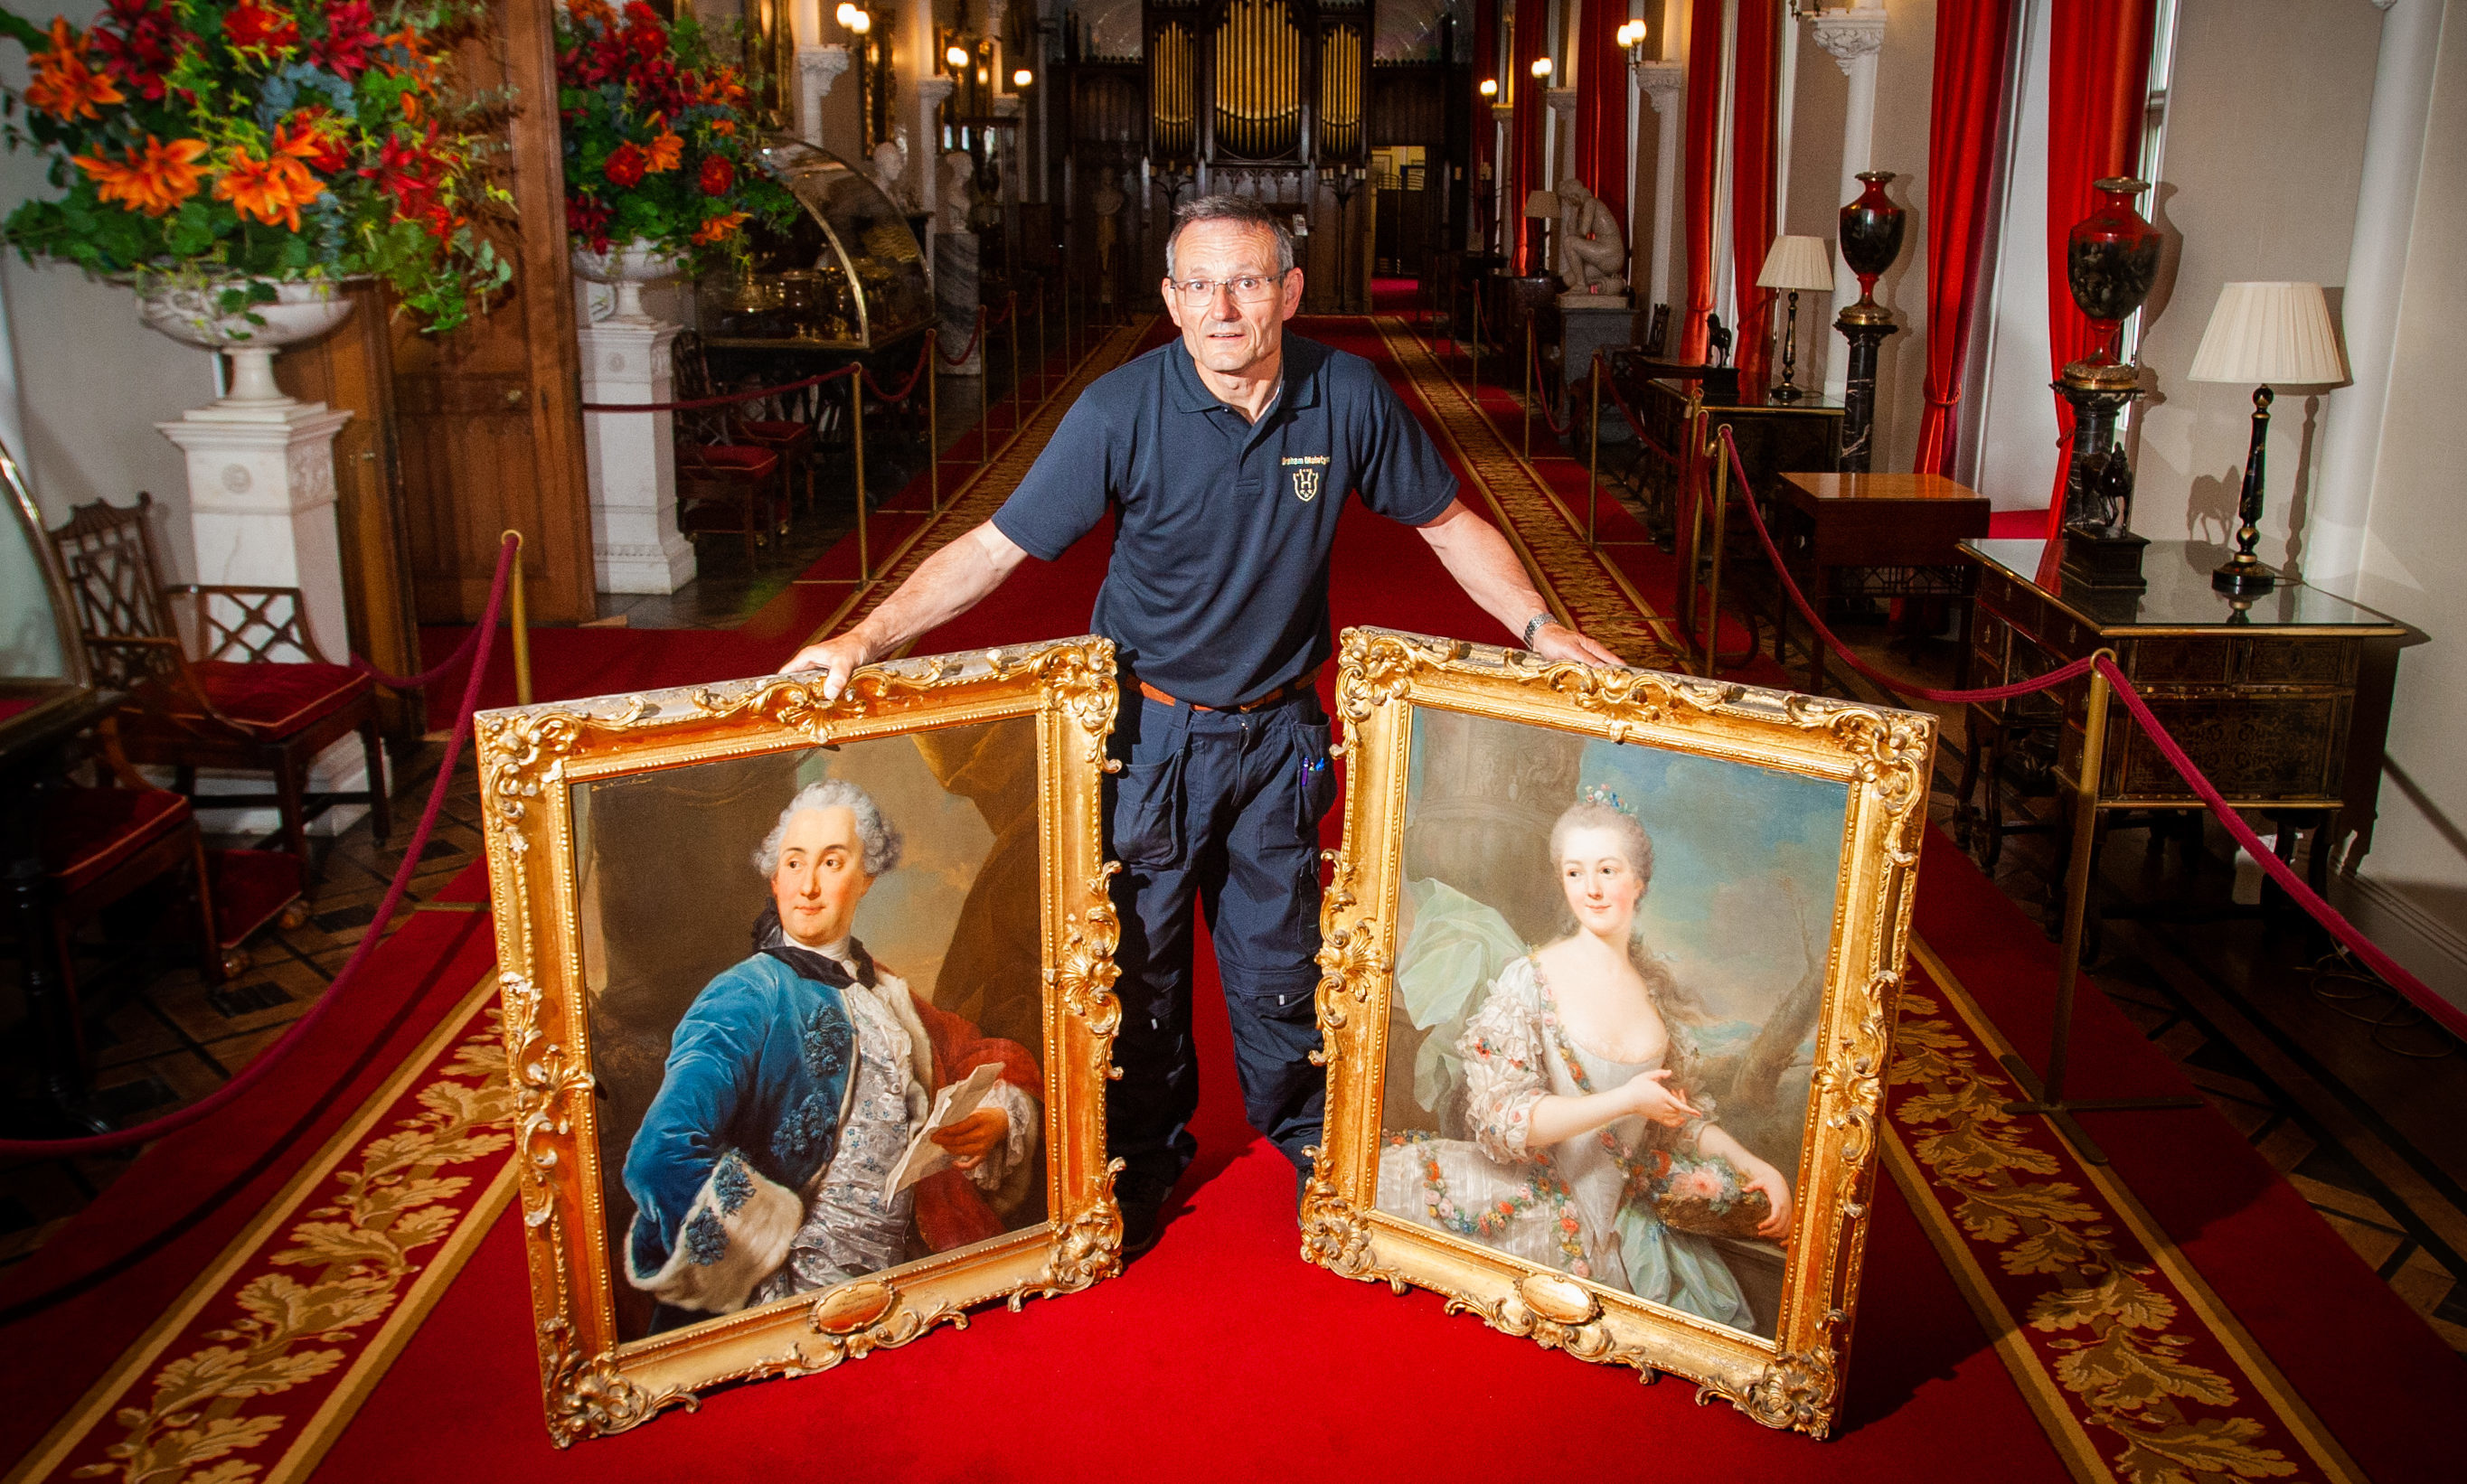 Two paintings by Marcello Bacciarelli to be transported to Warsaw for special exhibition. Picture shows Scone Palace curator Graham McIntyre with the two paintings, left is David 7th Viscount Stormont (Afterwards 2nd Earl of Mansfield) and right is Henrietta Countess Bunau 1st Wife of David 7th Viscount Stormont.